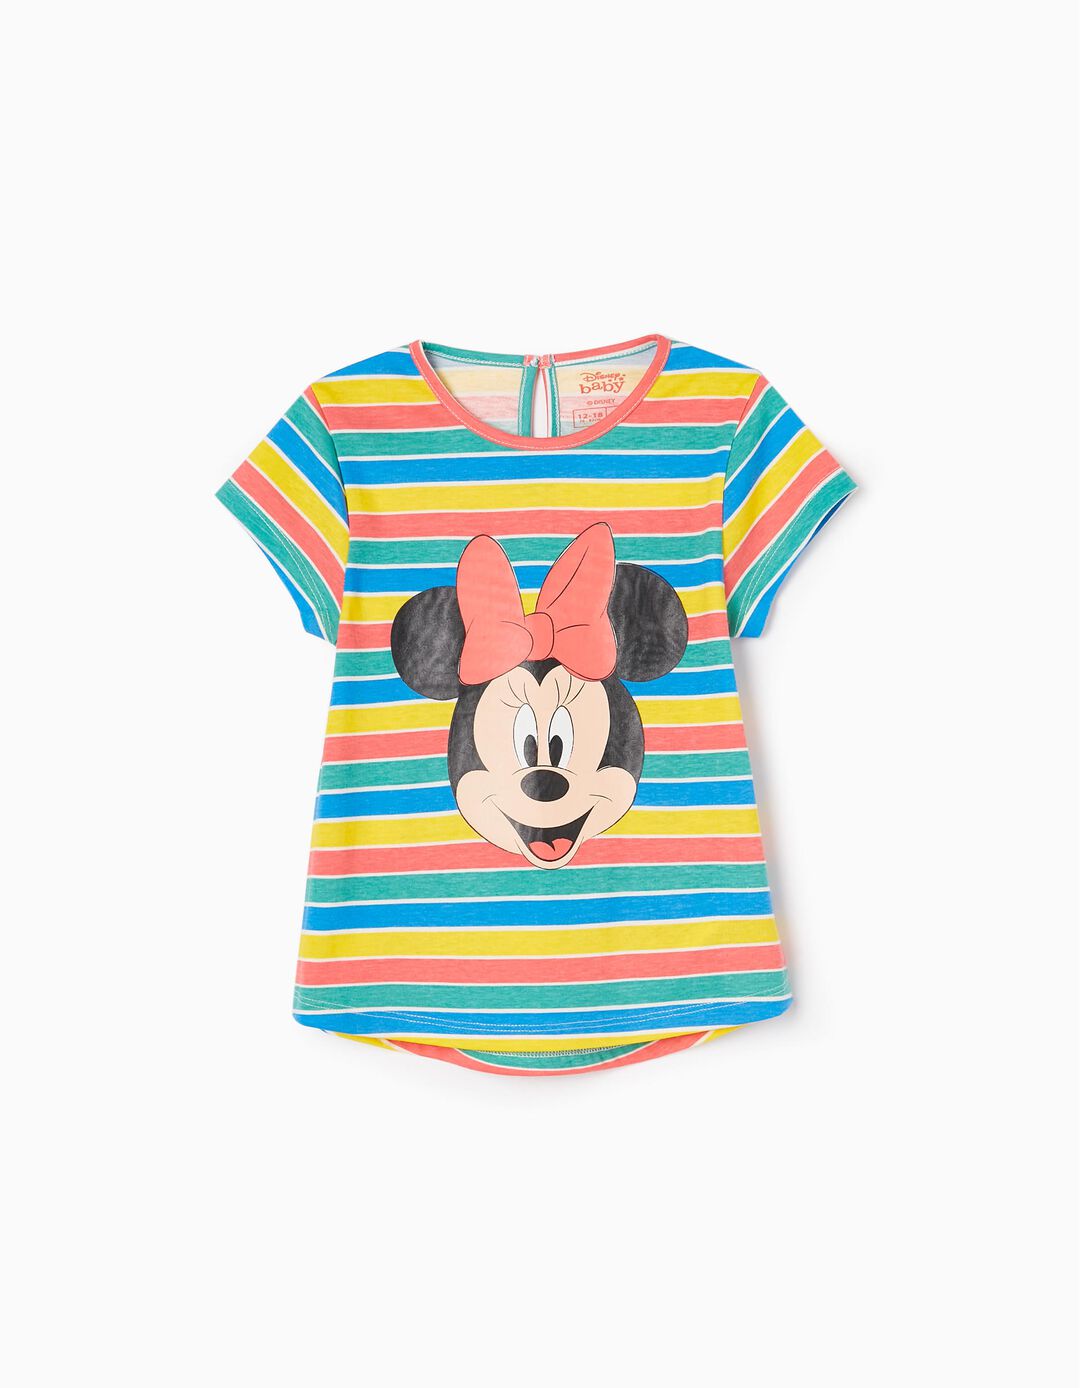 Cotton T-shirt for Baby Girls 'Minnie', Multicoloured